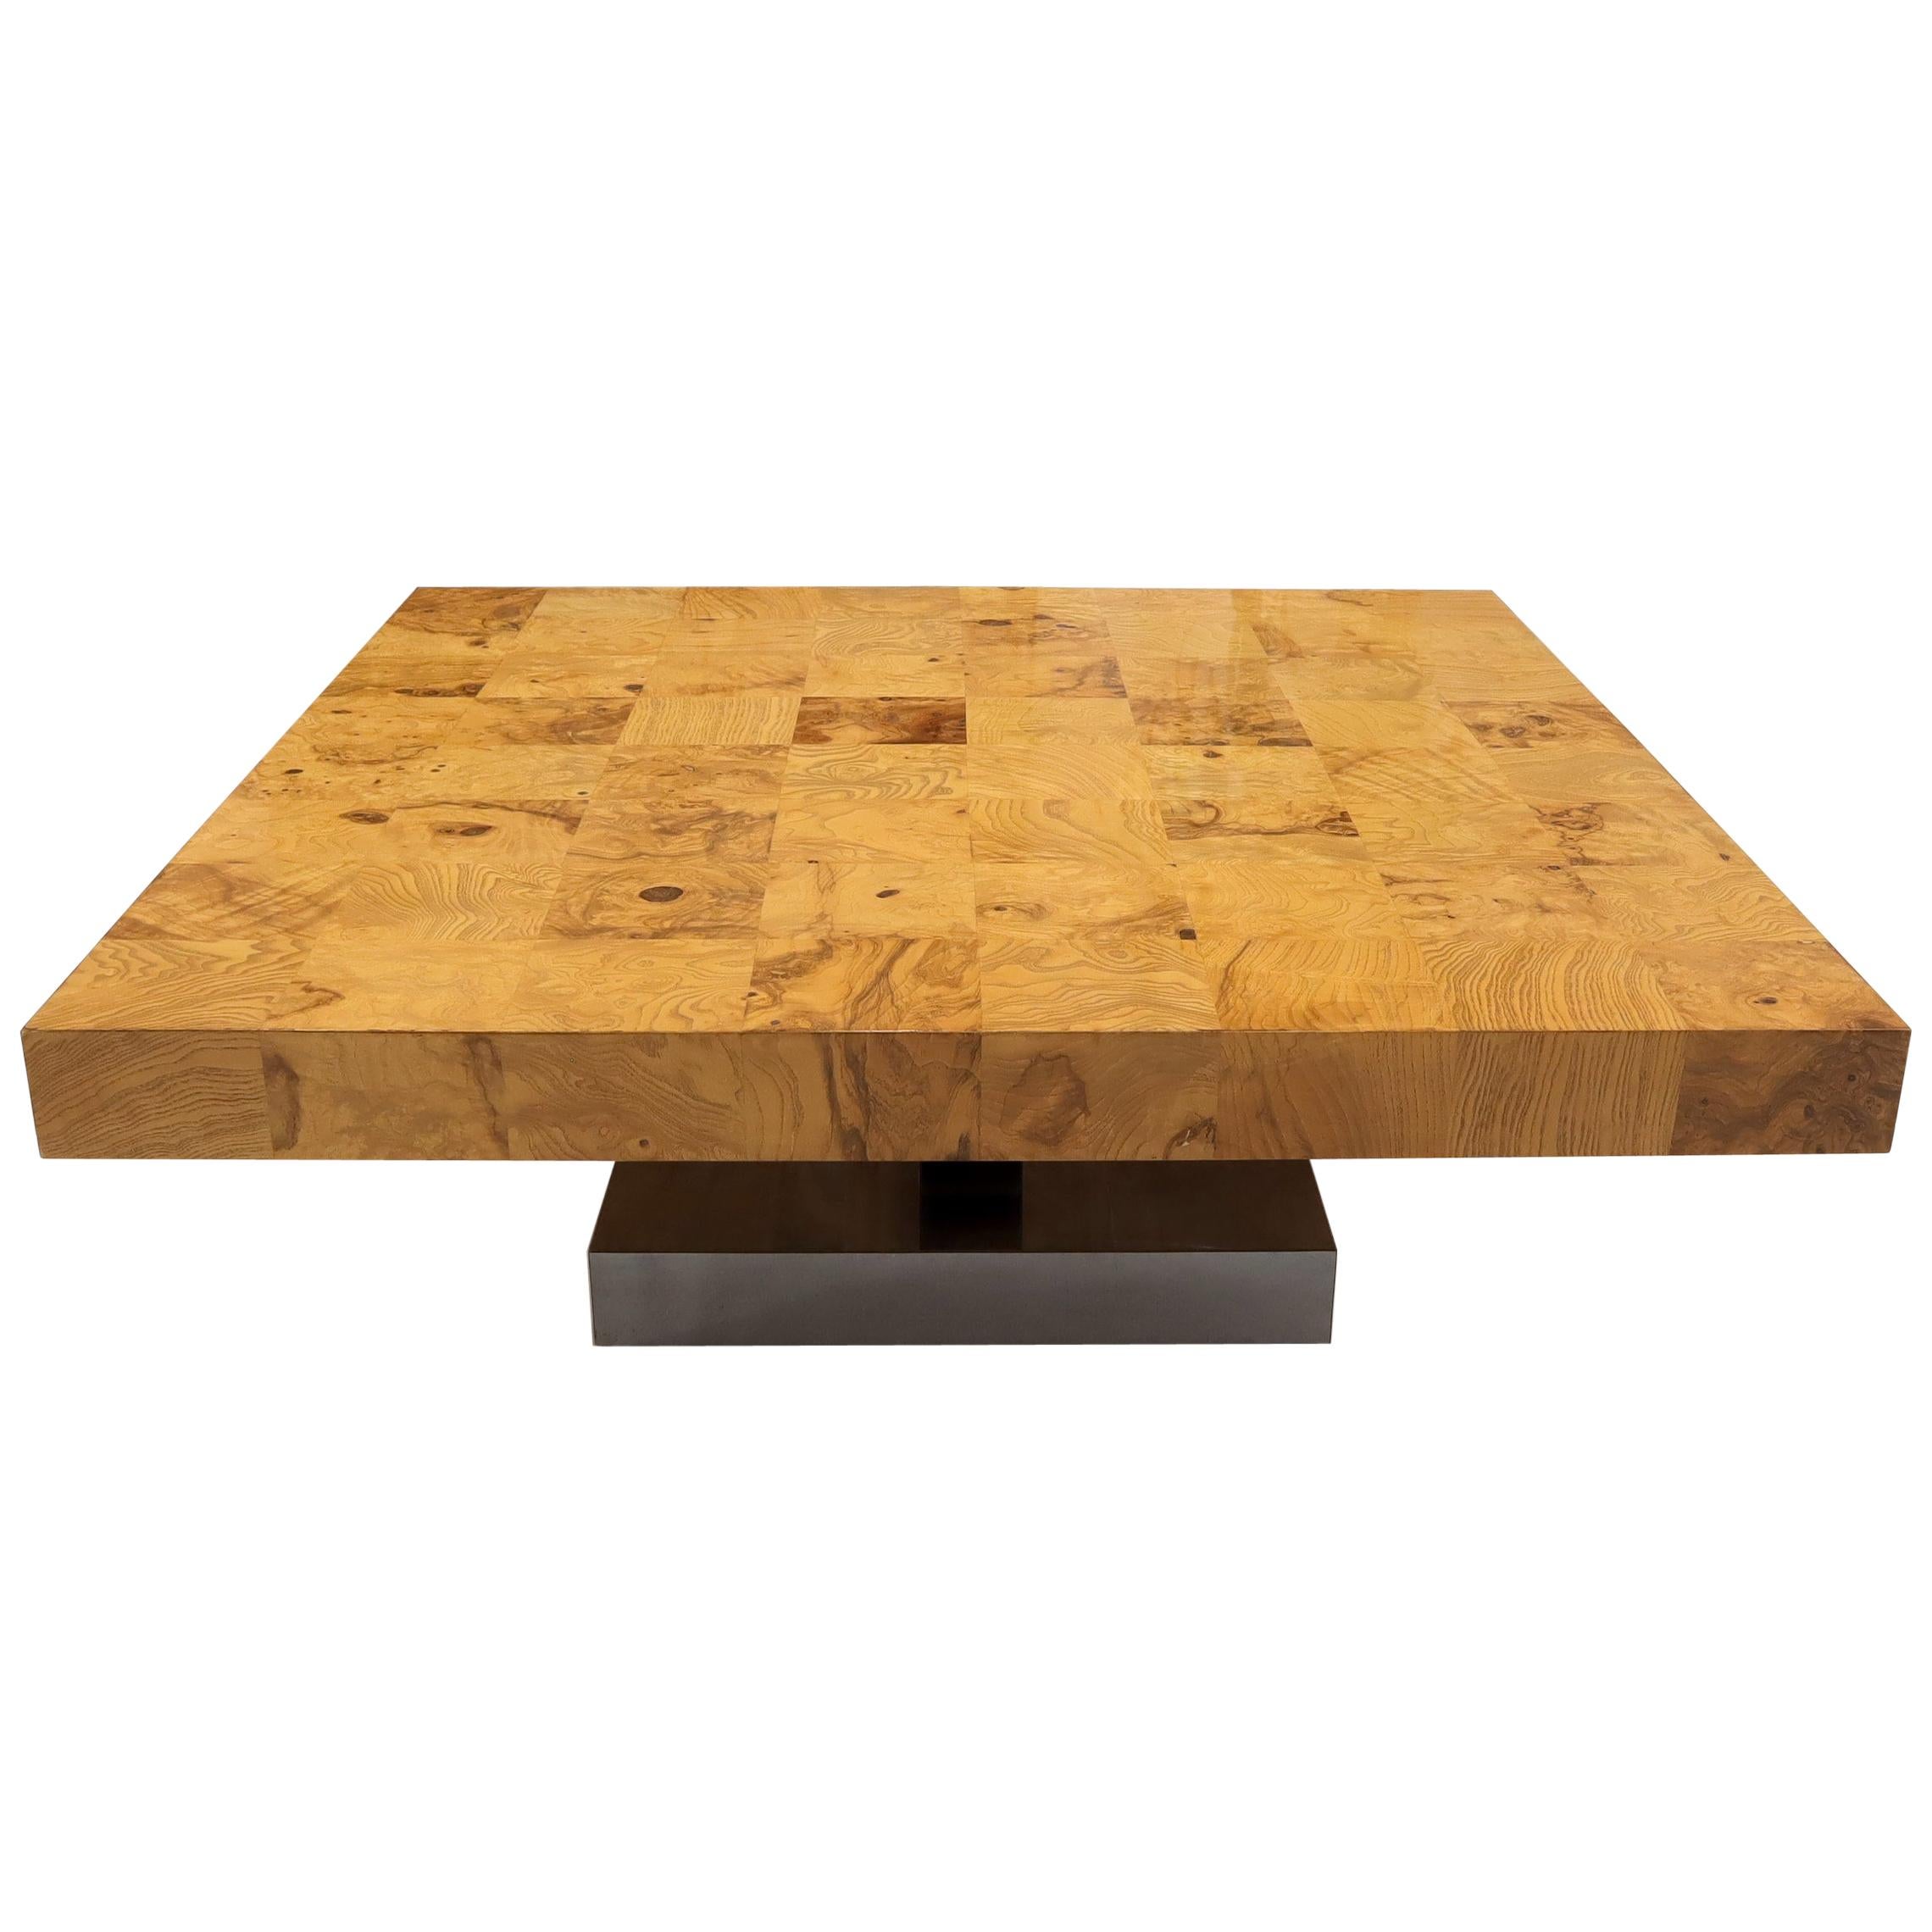 Baughman Square Burl Wood Patch Coffee Table on Chrome Pedestal Coffee Table 